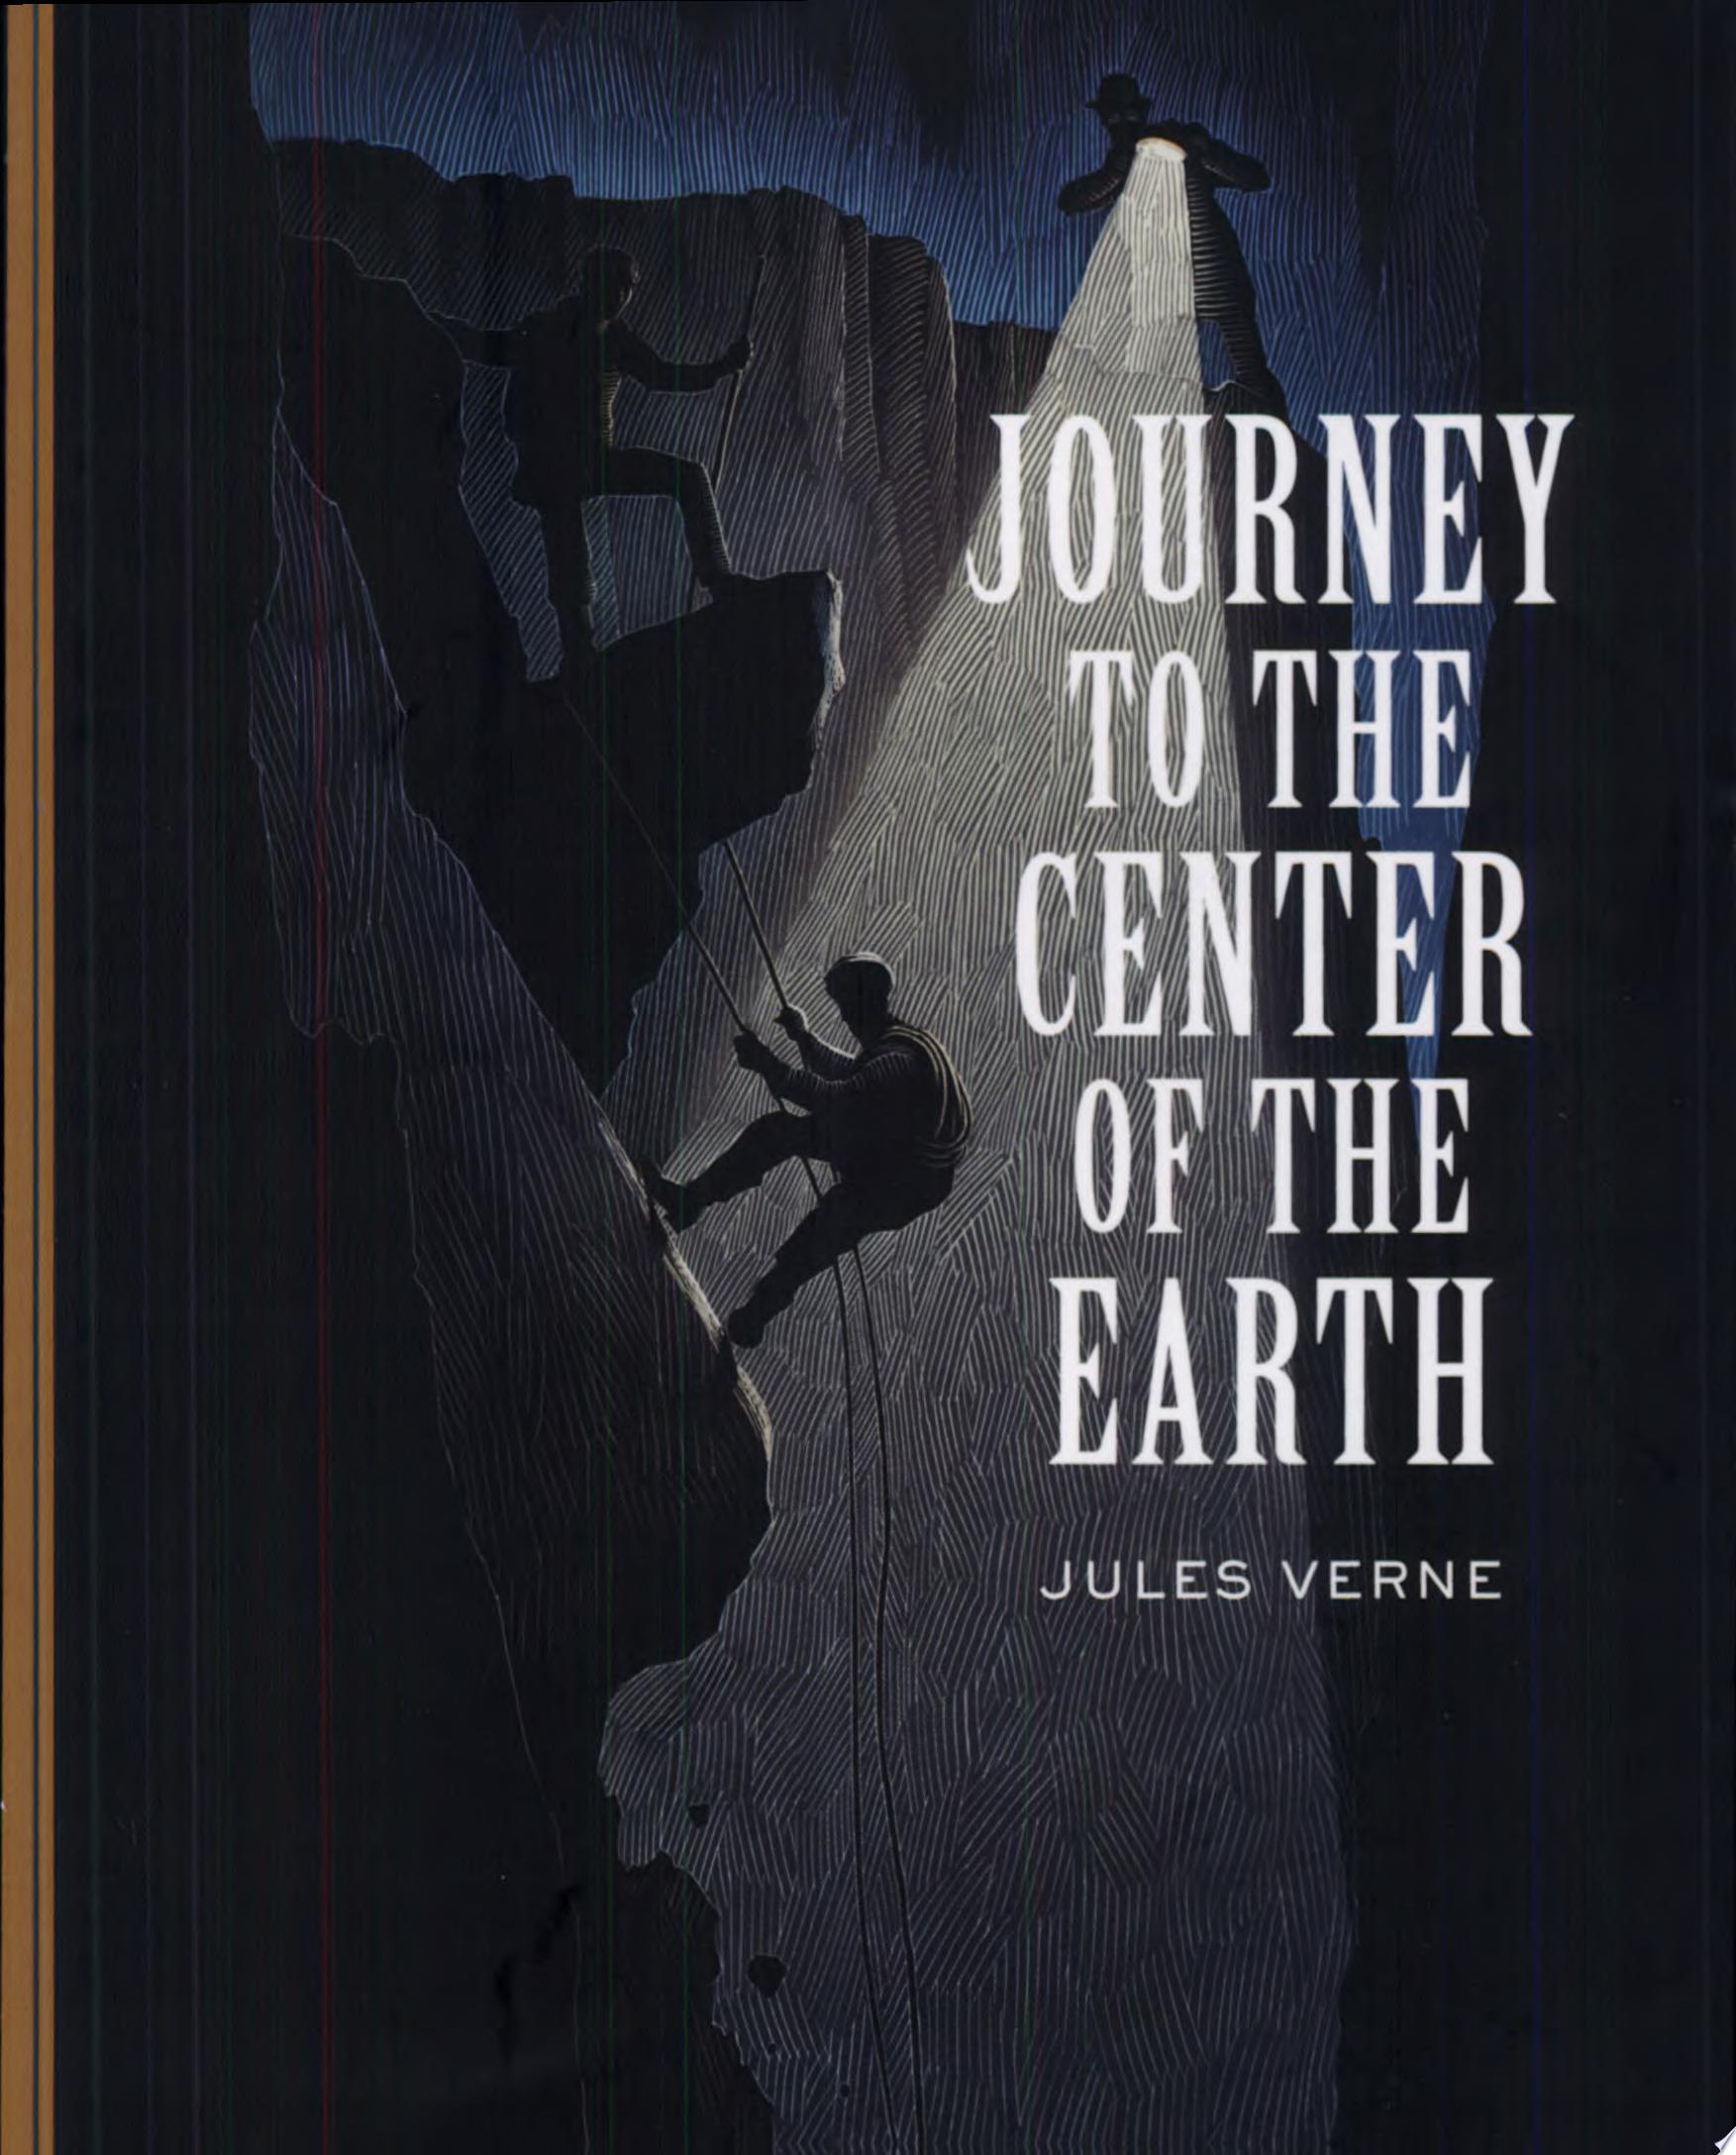 Image for "Journey to the Center of the Earth"